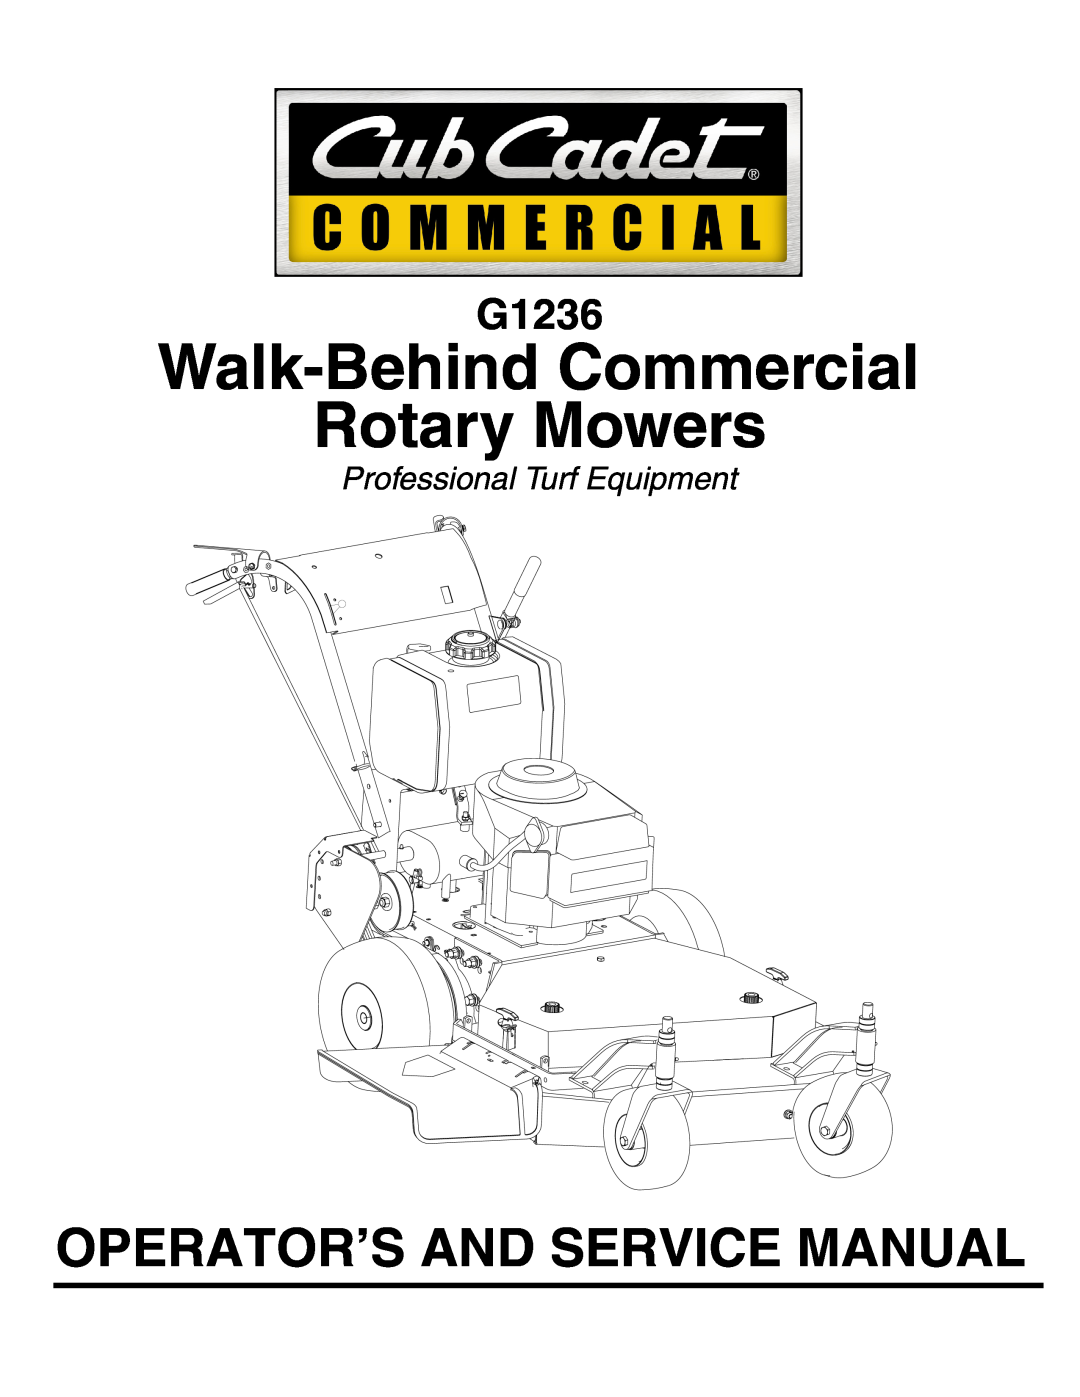 Cub Cadet G 1236 service manual Walk-Behind Commercial Rotary Mowers, G1236, Professional Turf Equipment 